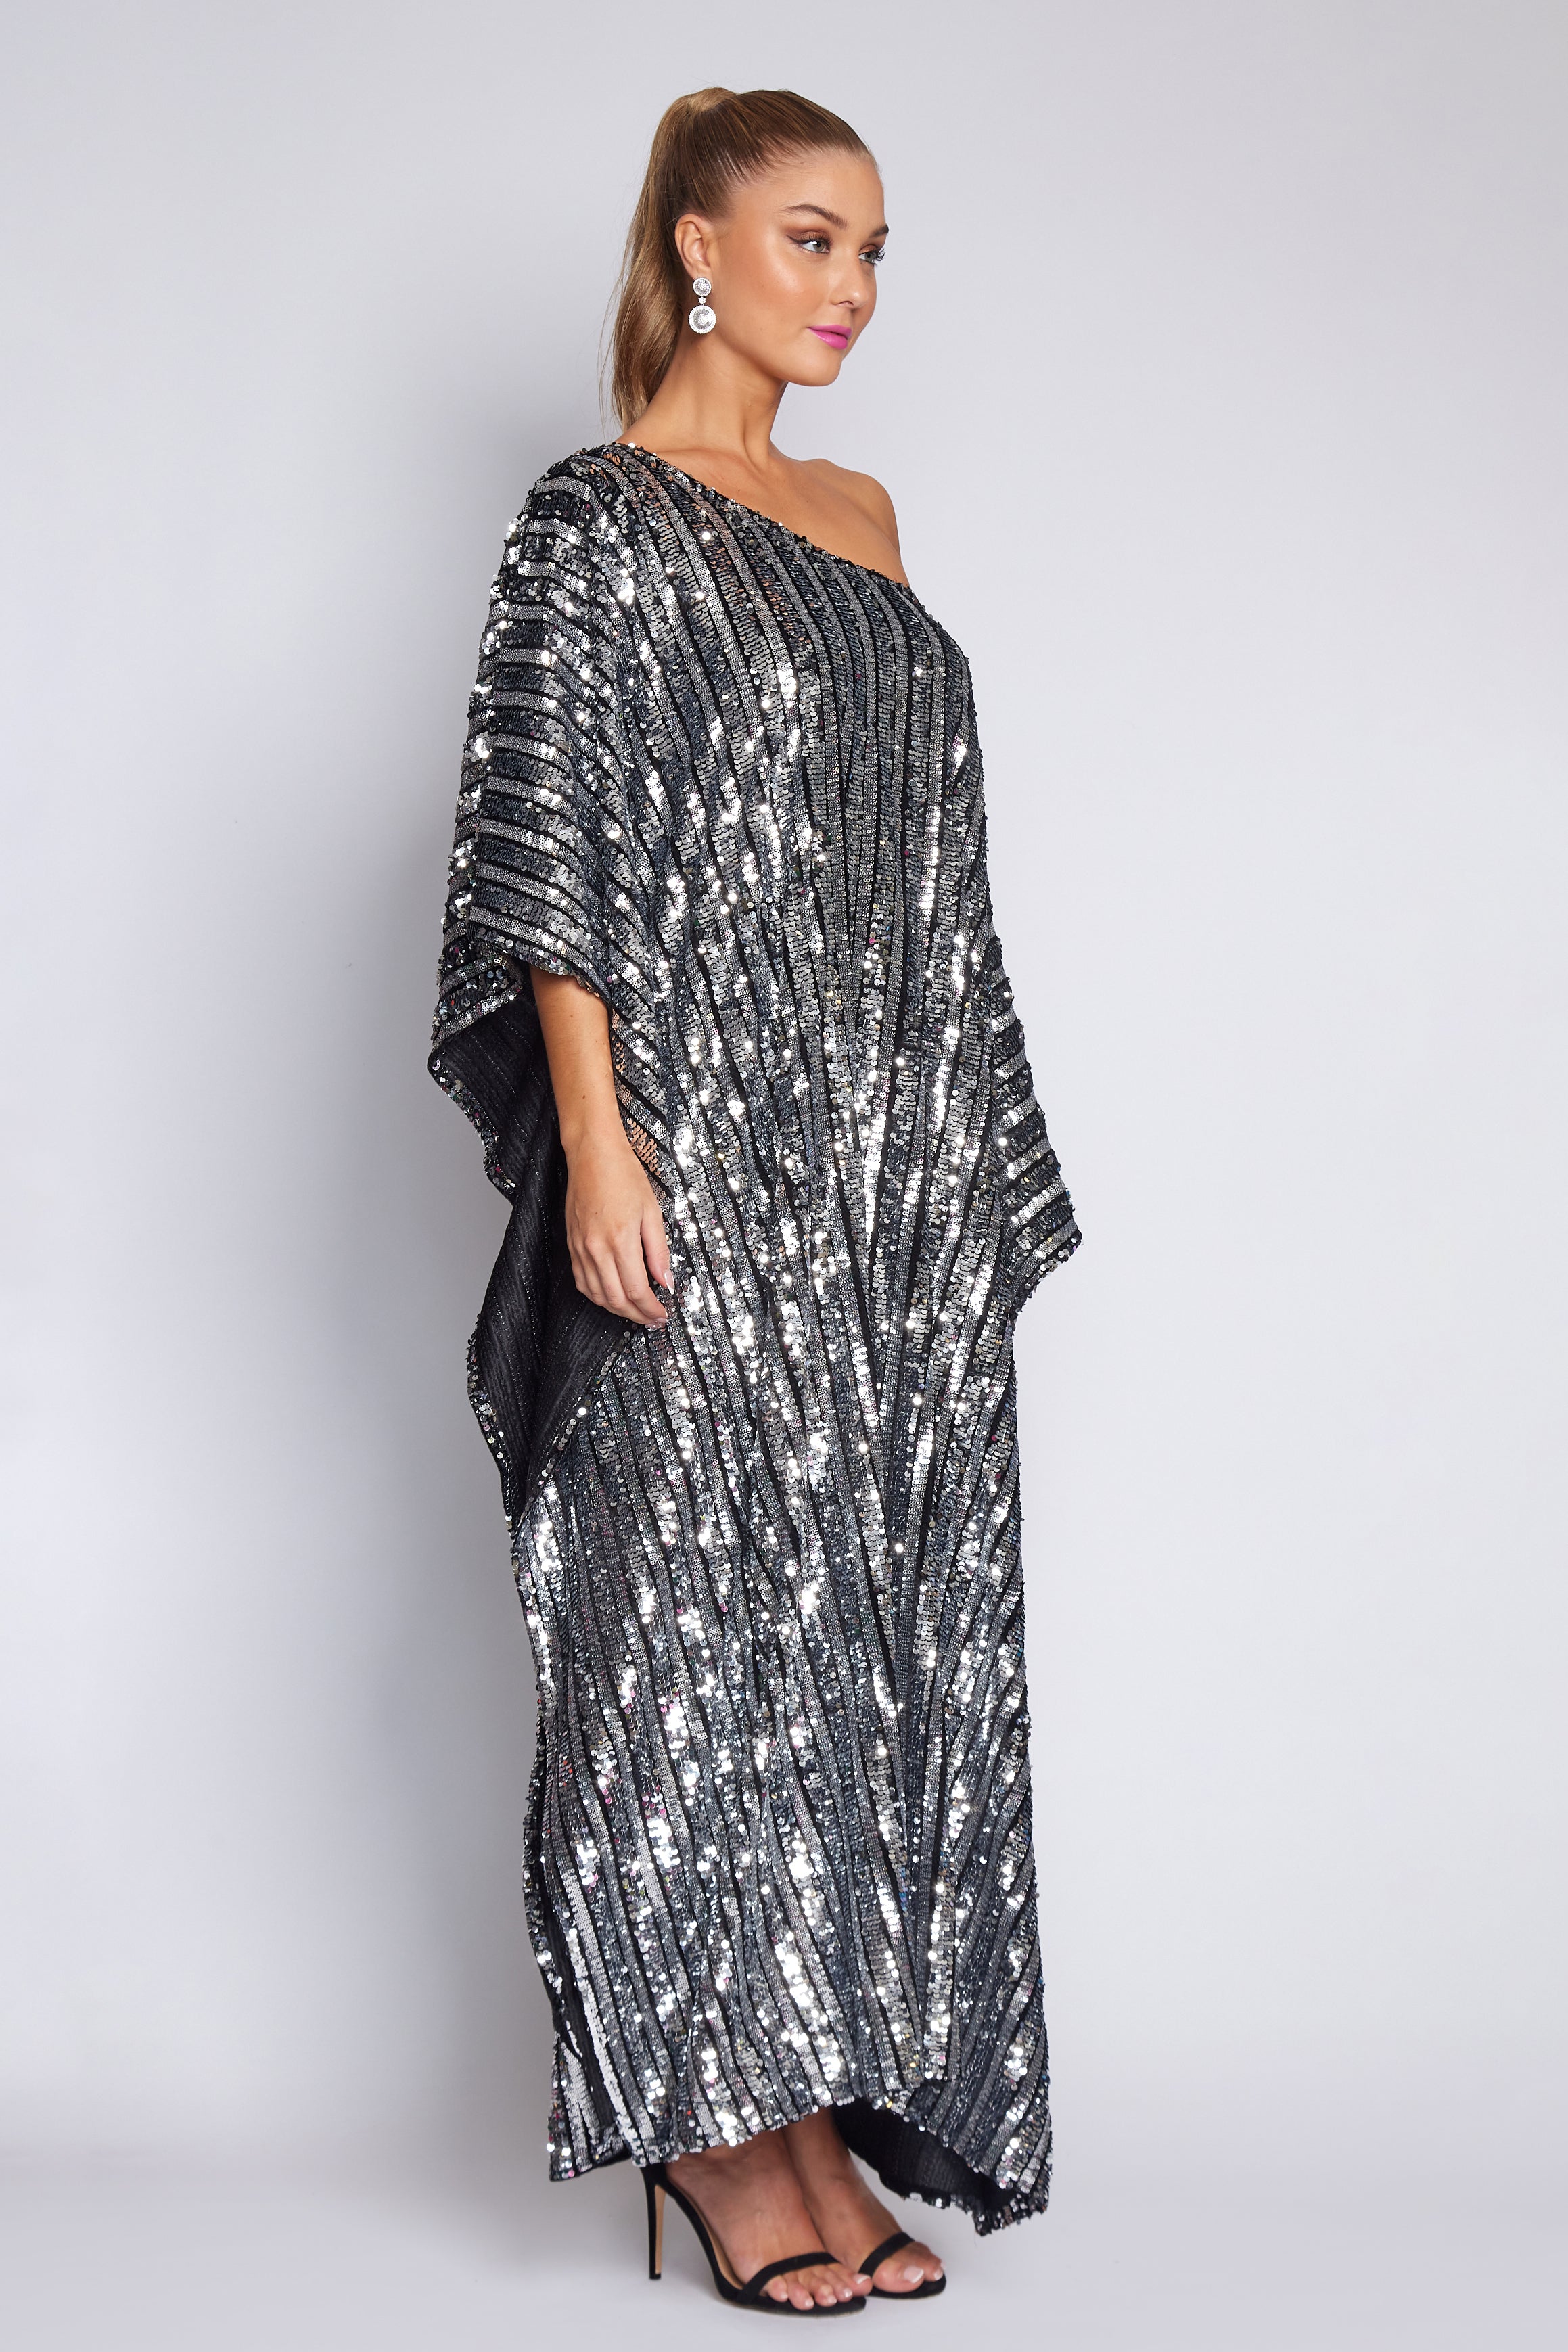 Black and Silver Sequin Kaftan